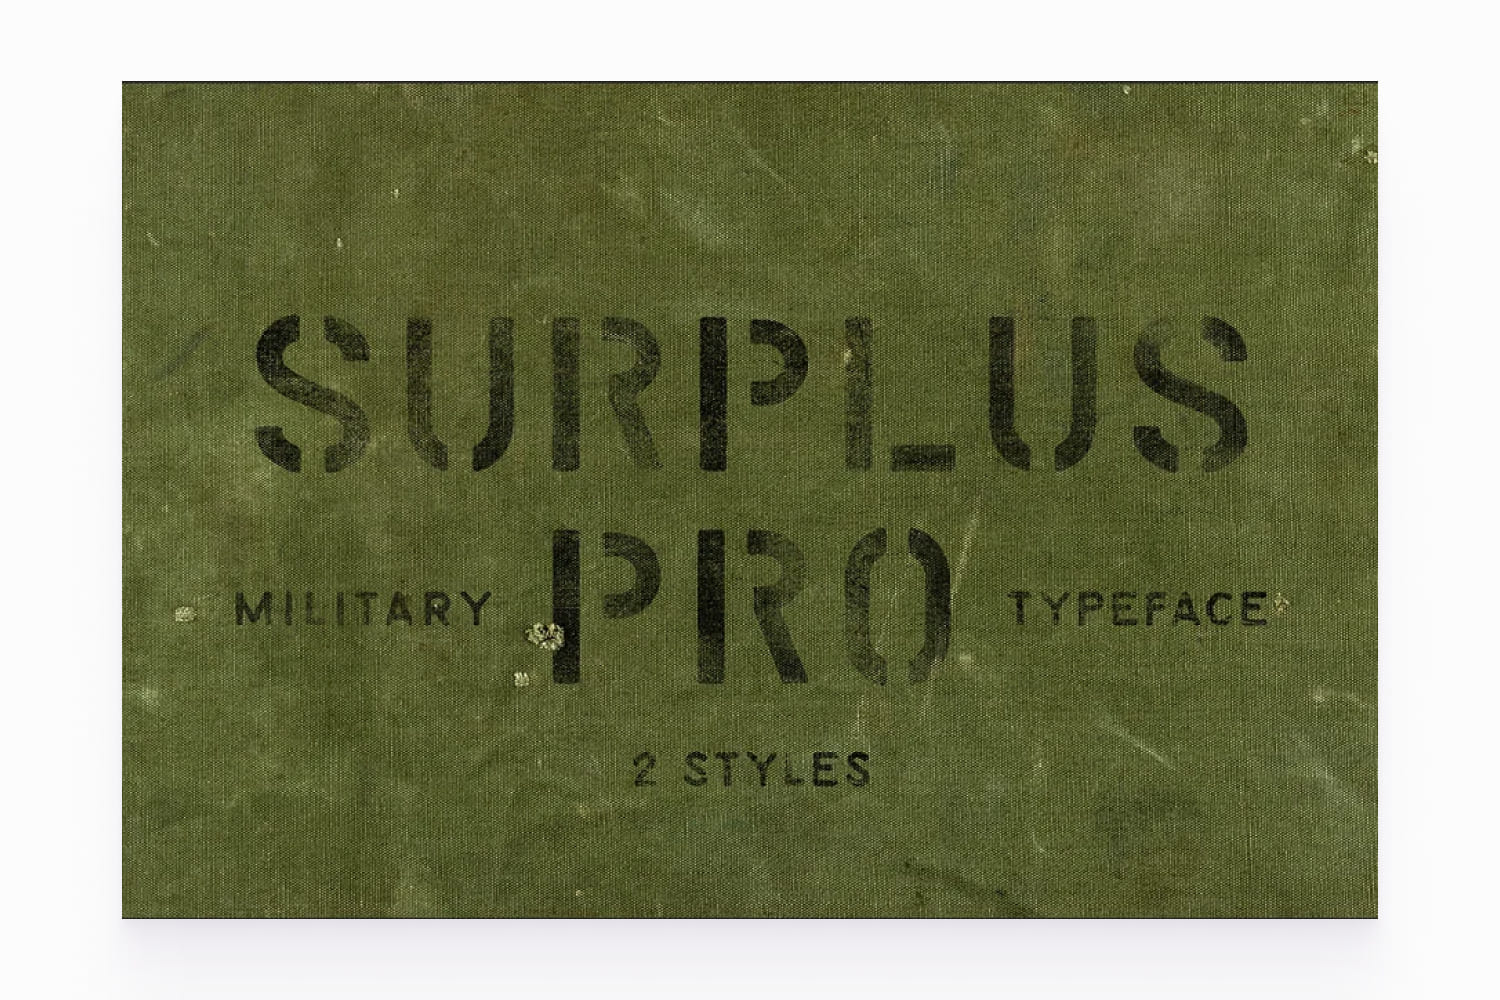 Military style text on green background.